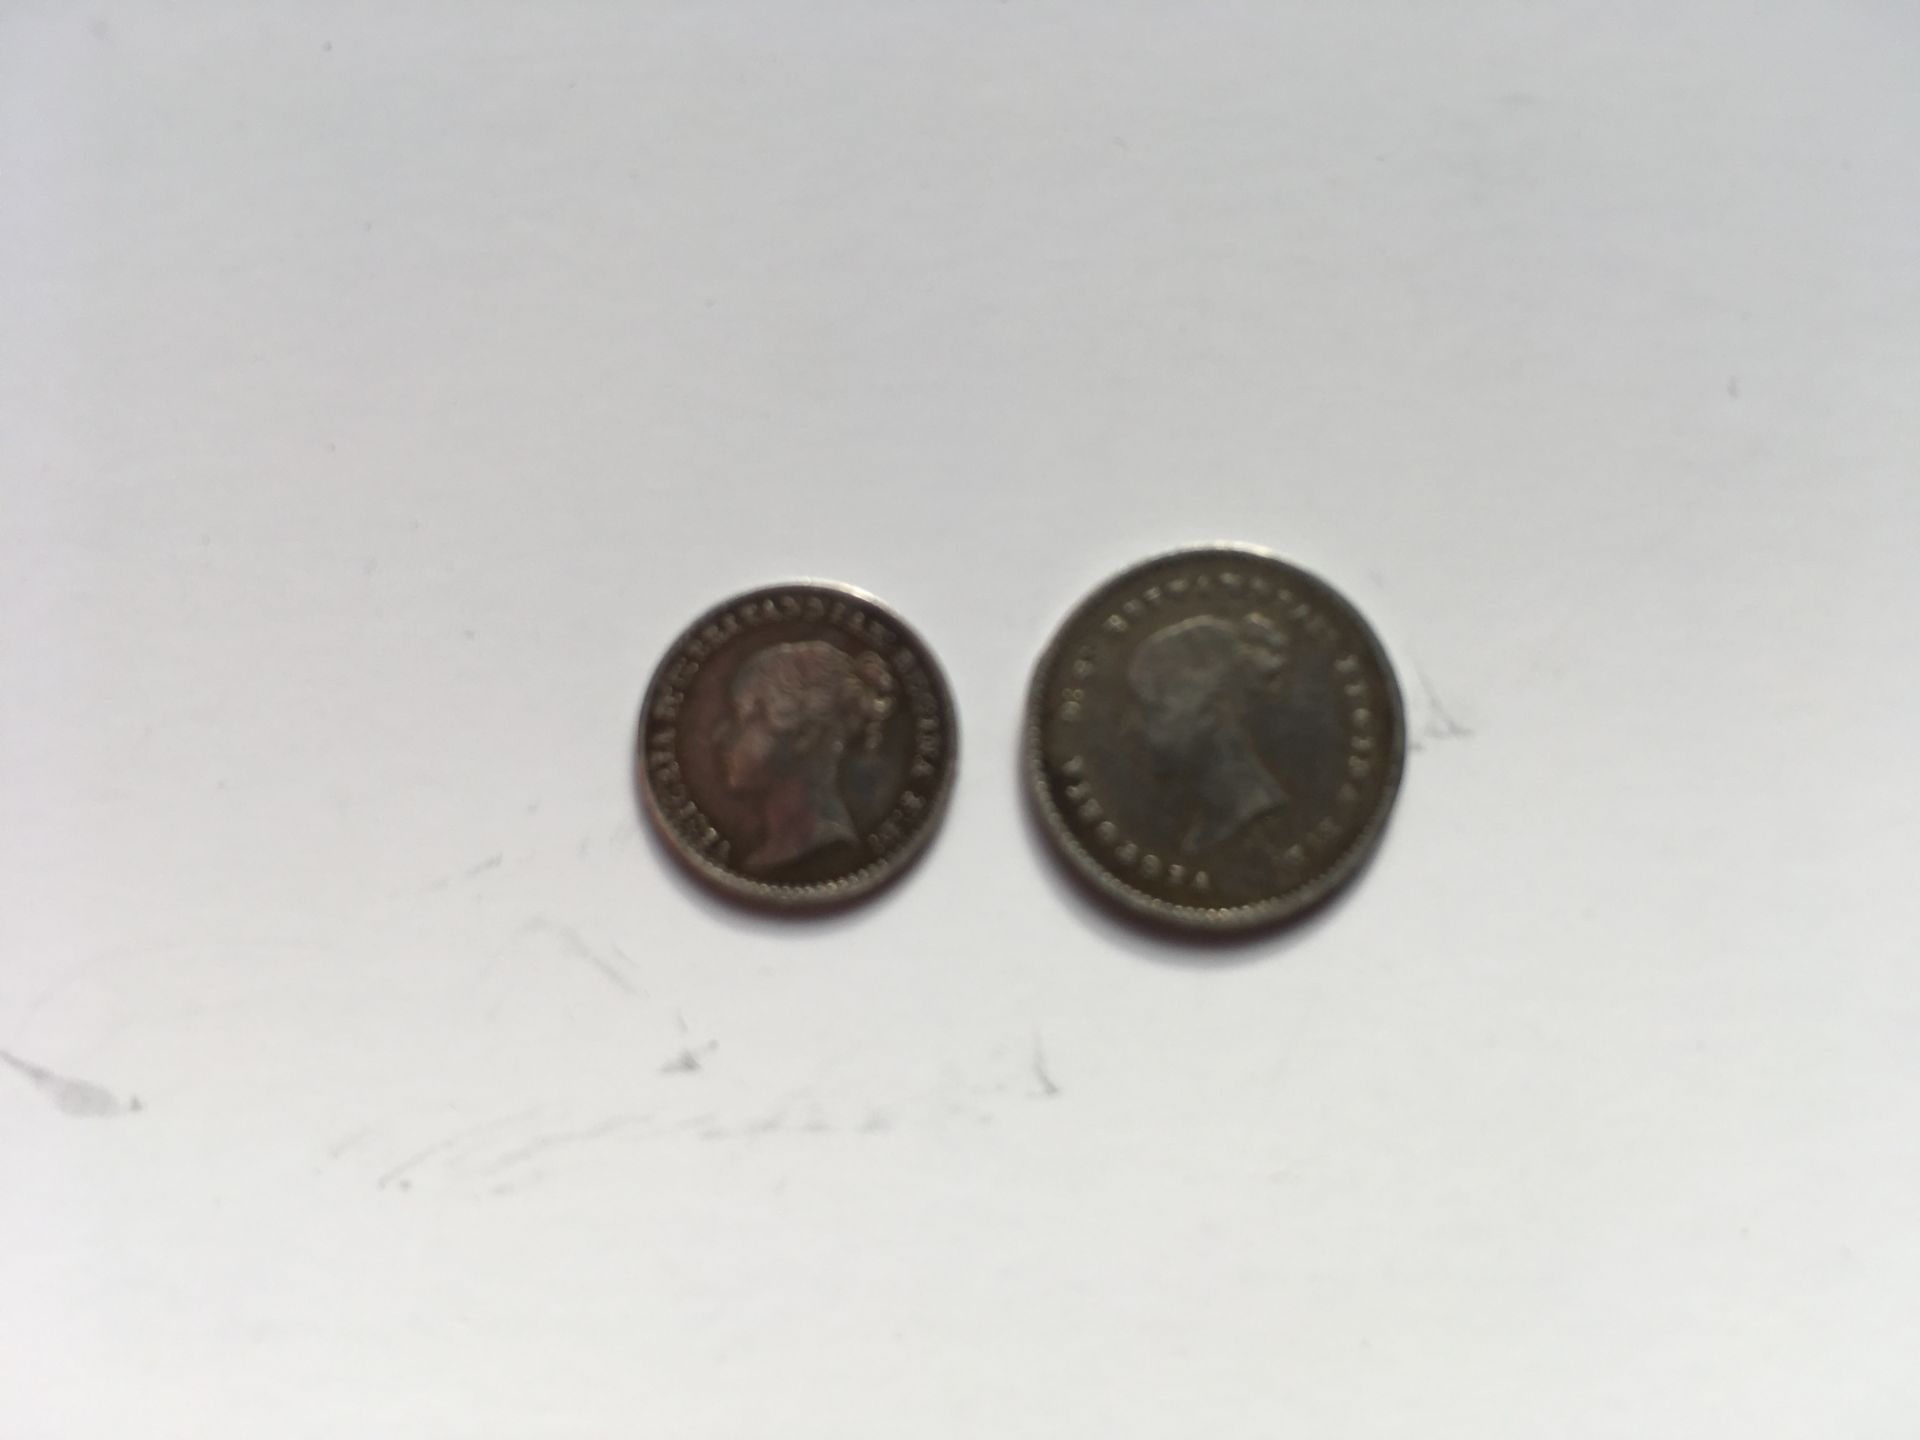 COINS: GB MAUNDY PENNY 1870 AND TWO PENCE 1838. - Image 8 of 8